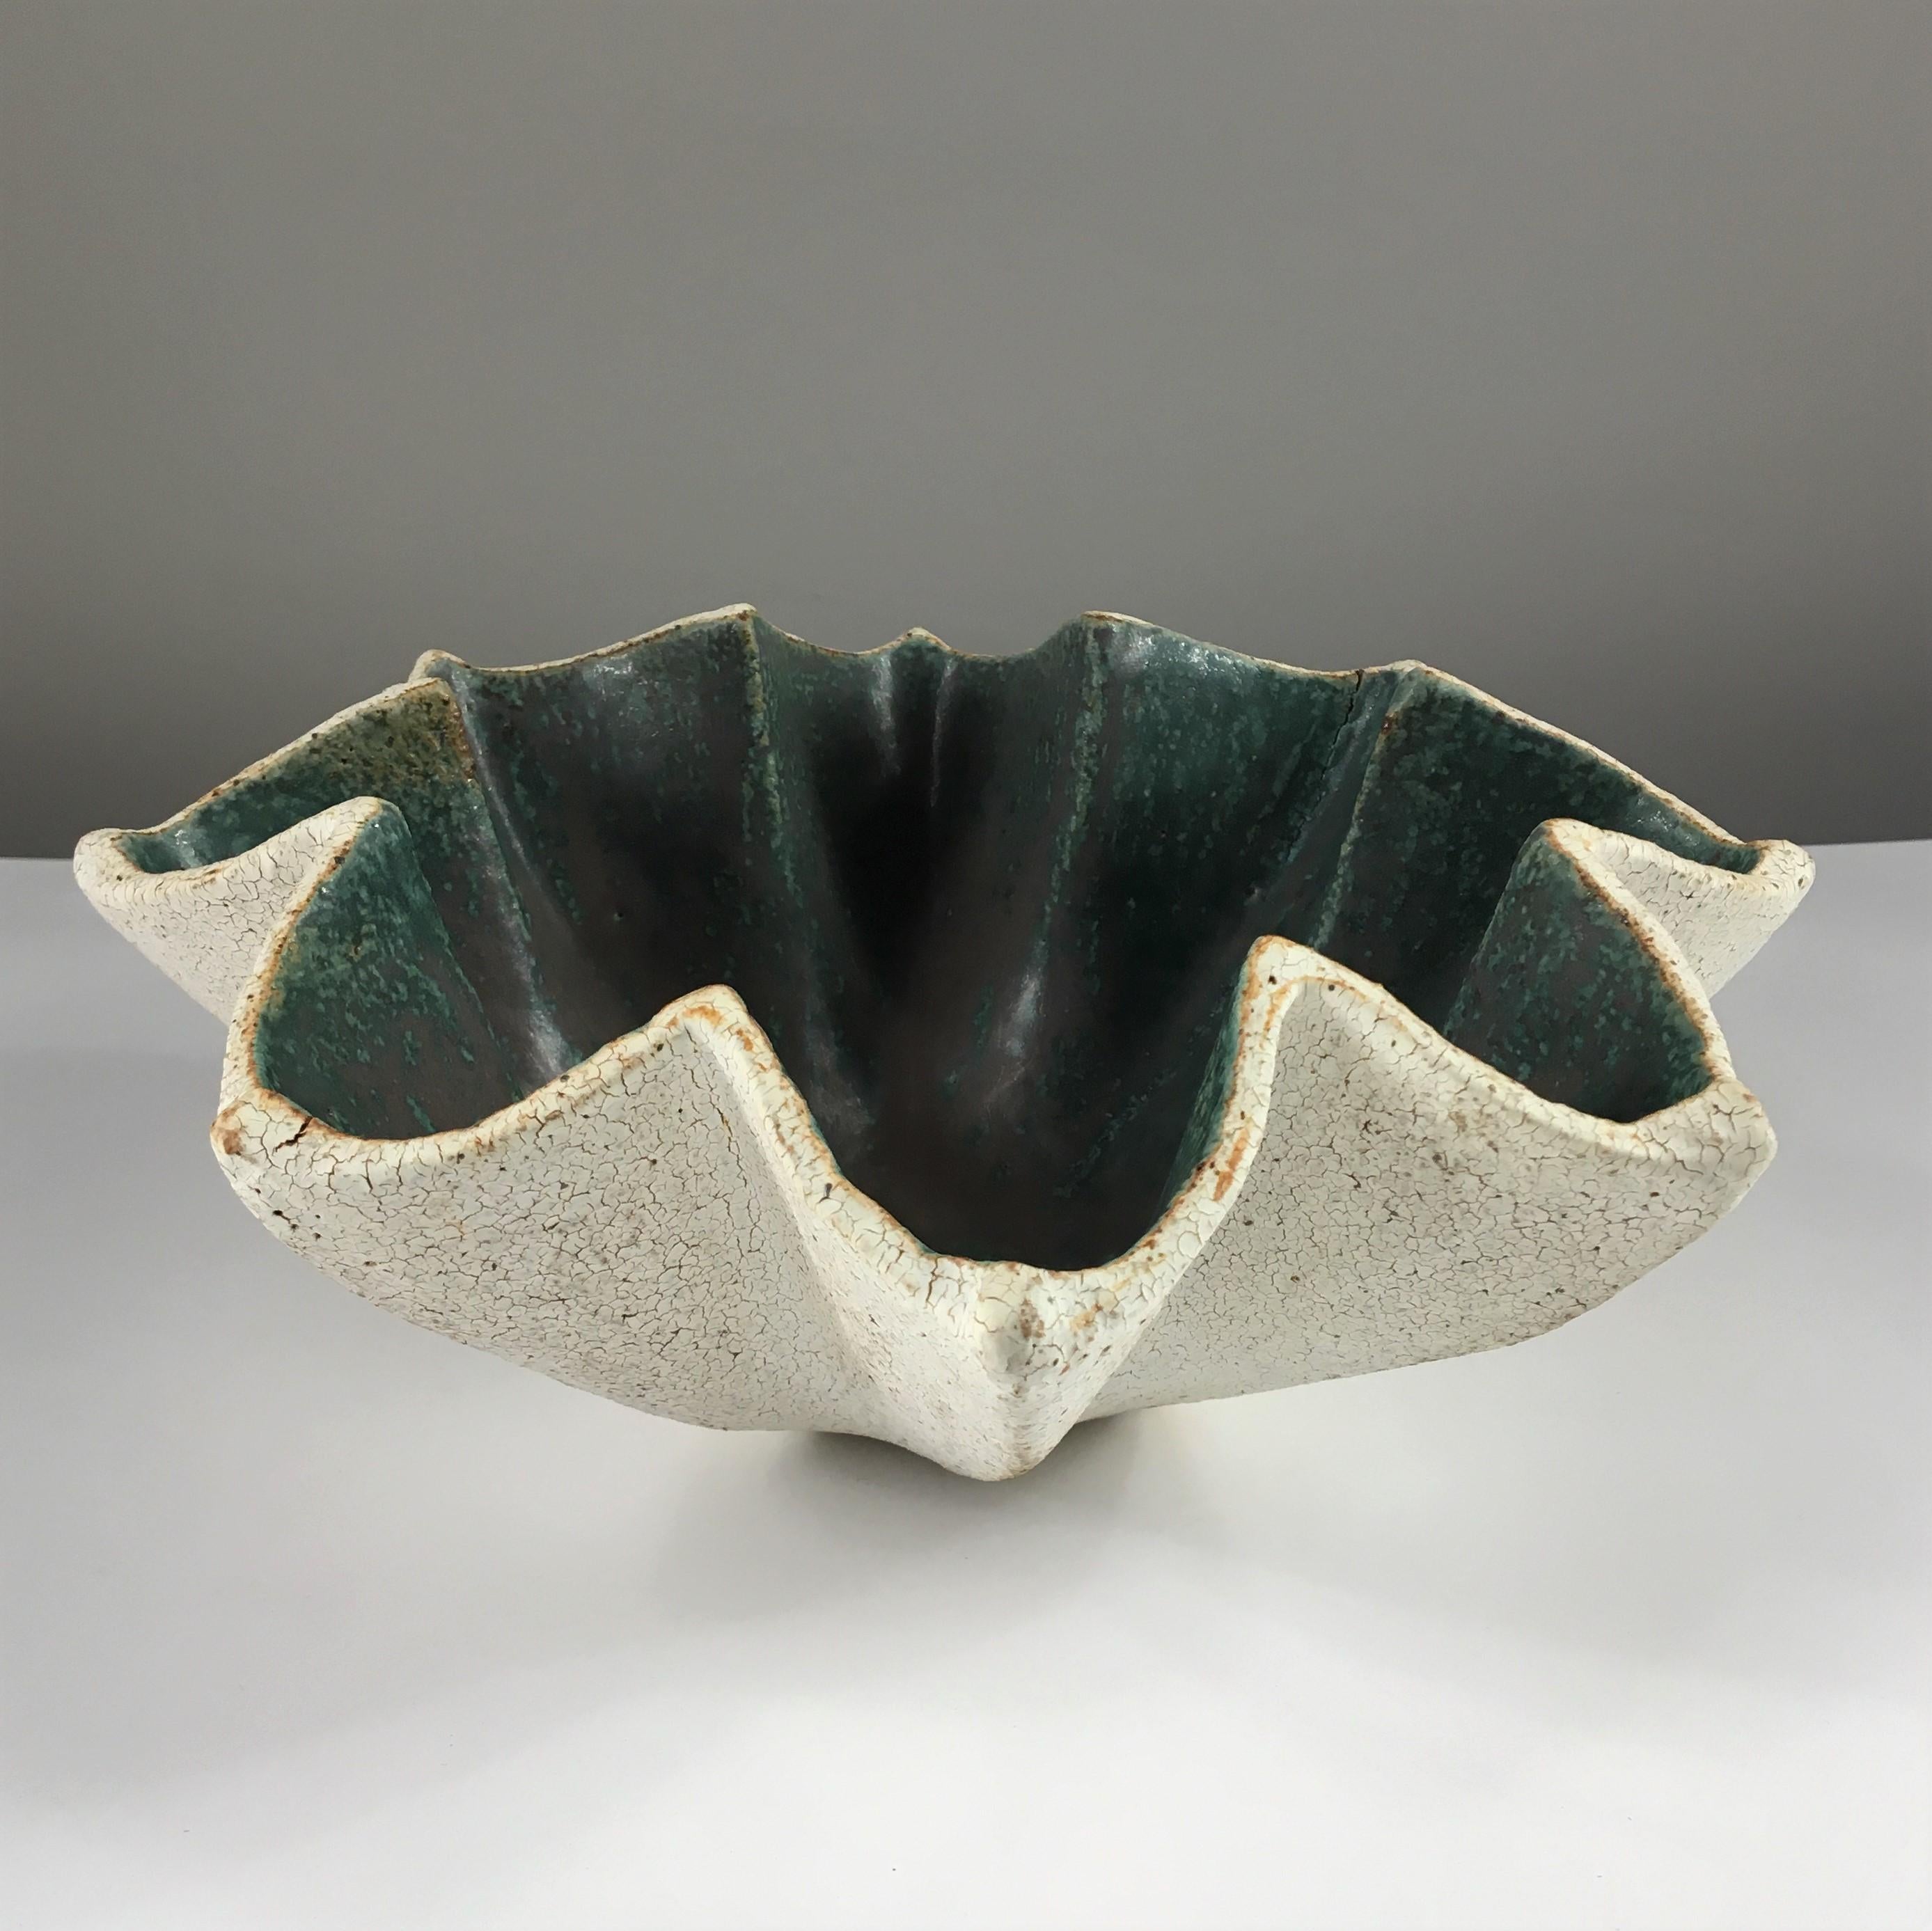 Ceramic Star Bowl with Green Glaze by Yumiko Kuga. Dimensions: H 5.5